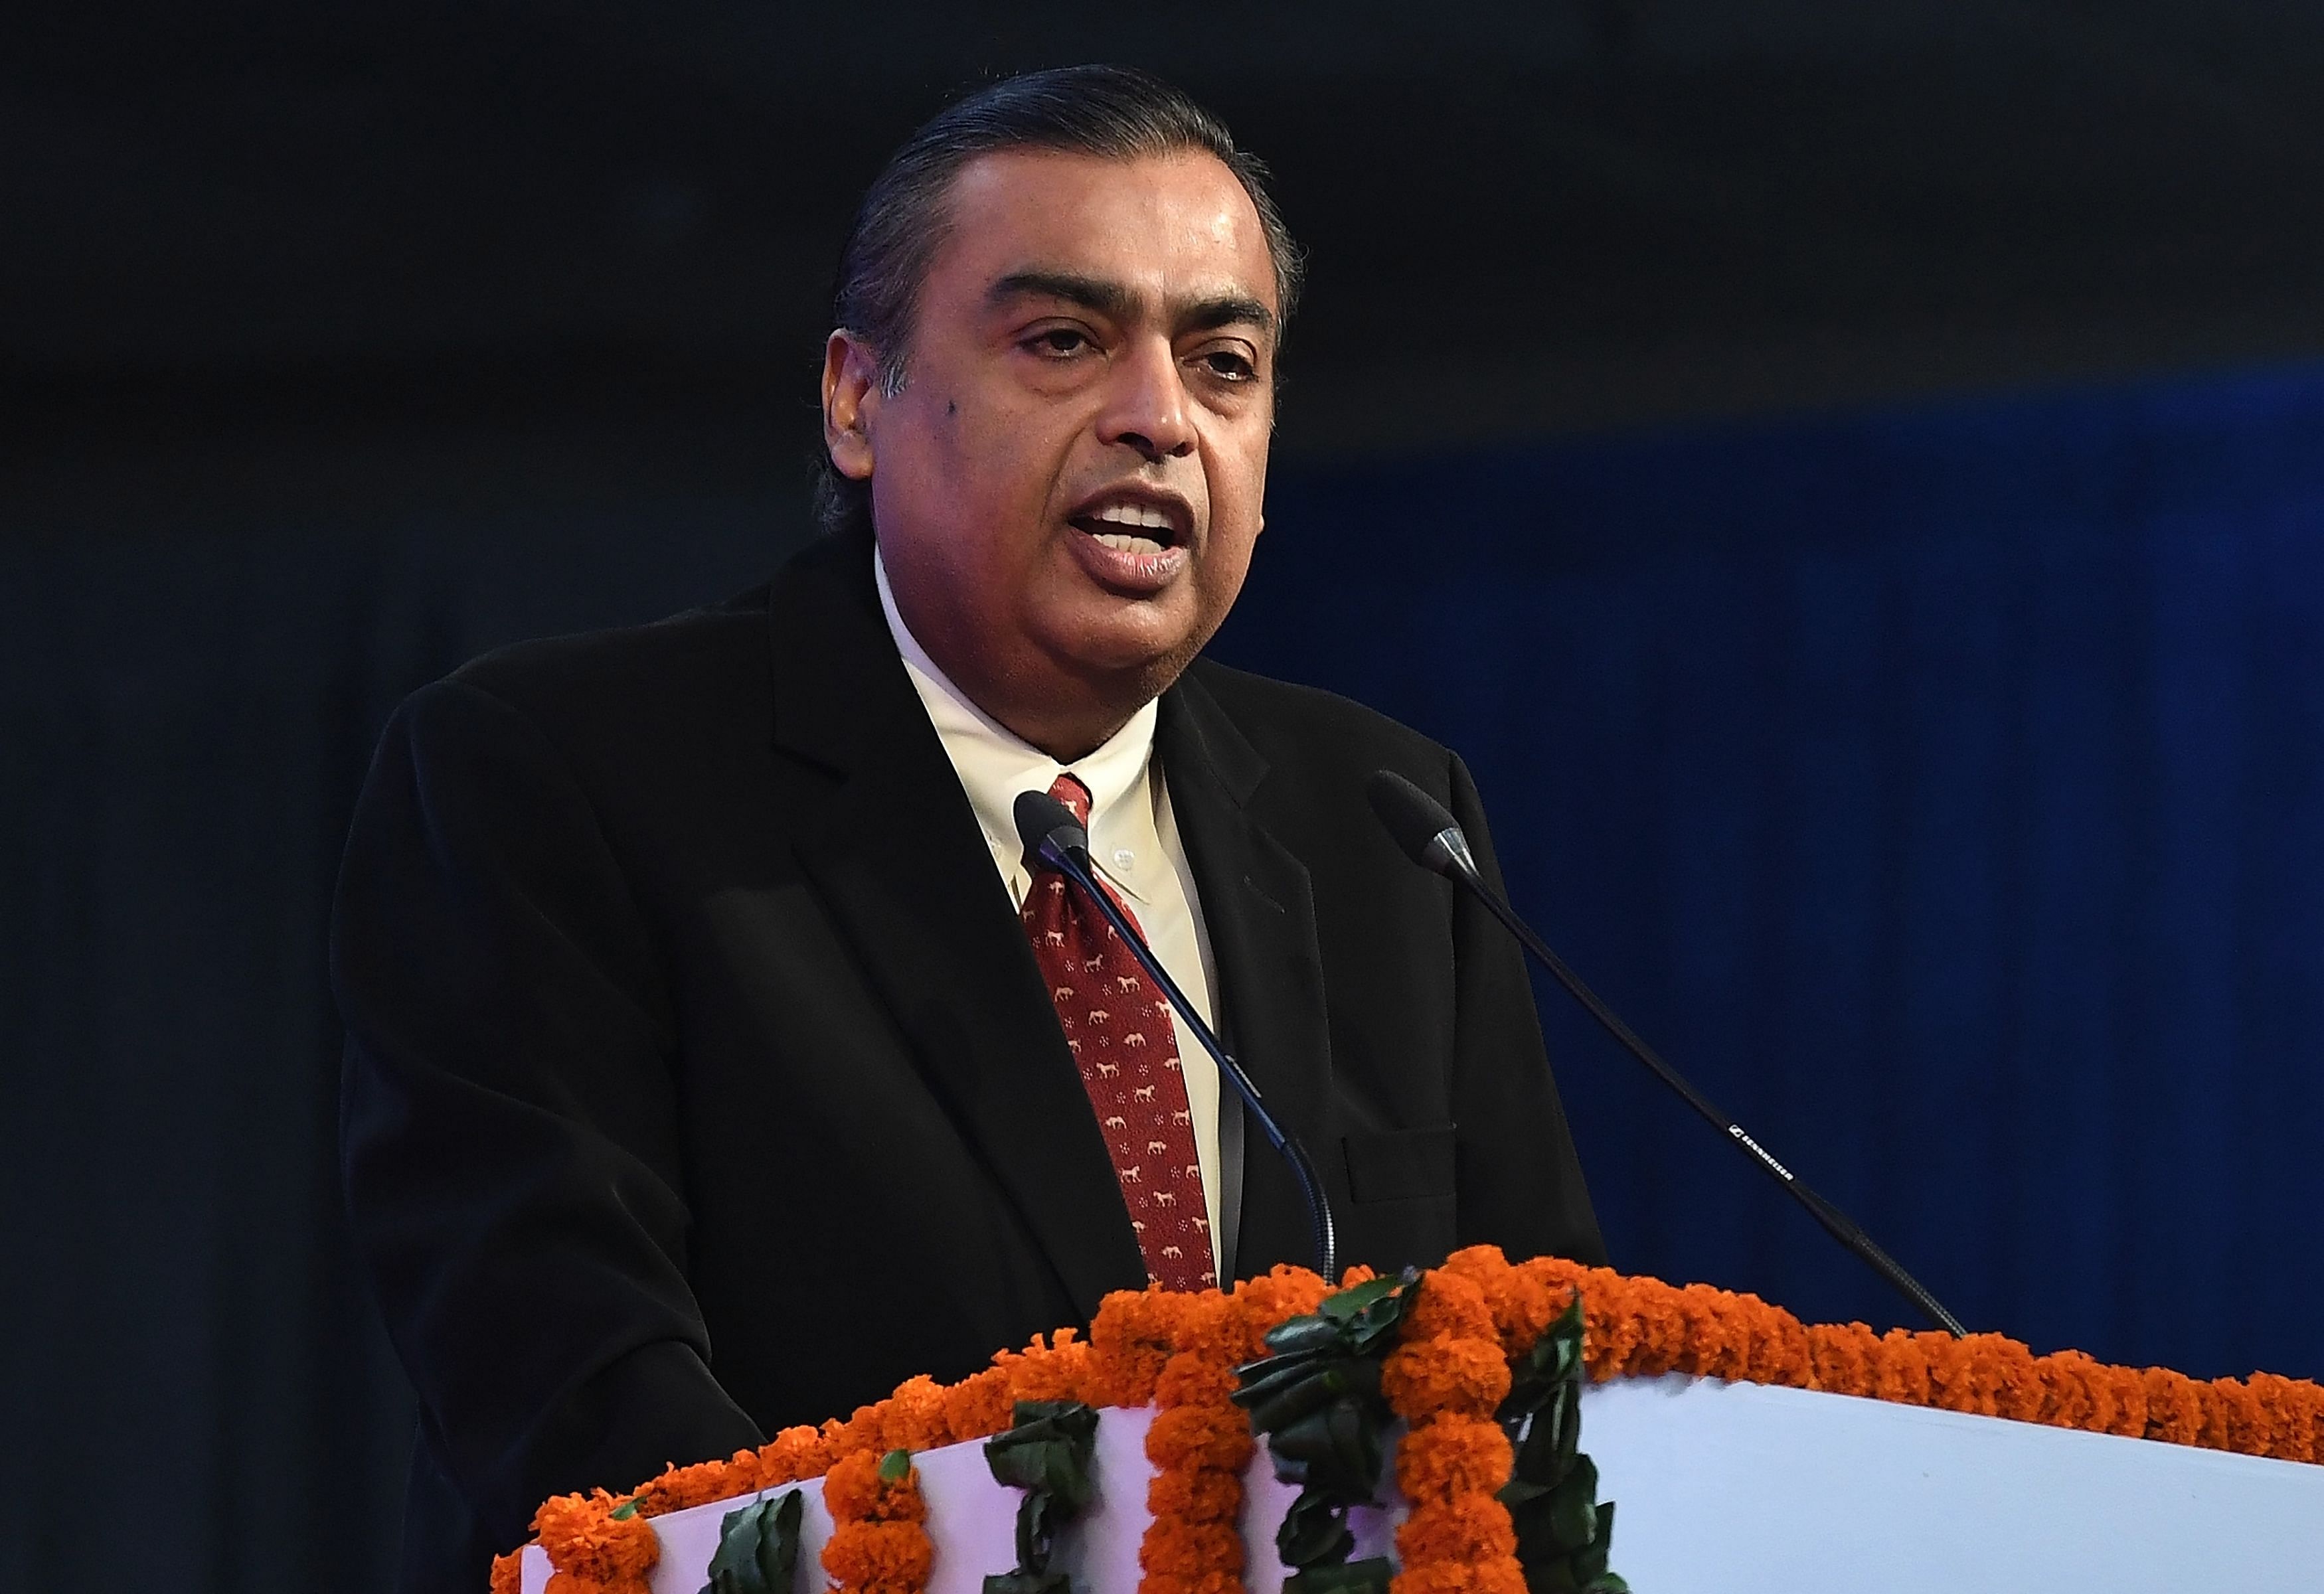 The soft launch of JioMart takes Reliance Chairman Mukesh Ambani, also Asia’s richest man, one step closer to taking on Amazon.com Inc. and Walmart Inc.’s Flipkart in an e-commerce market that KPMG says is likely to grow to $200 billion by 2027. (Credit: AFP photo)